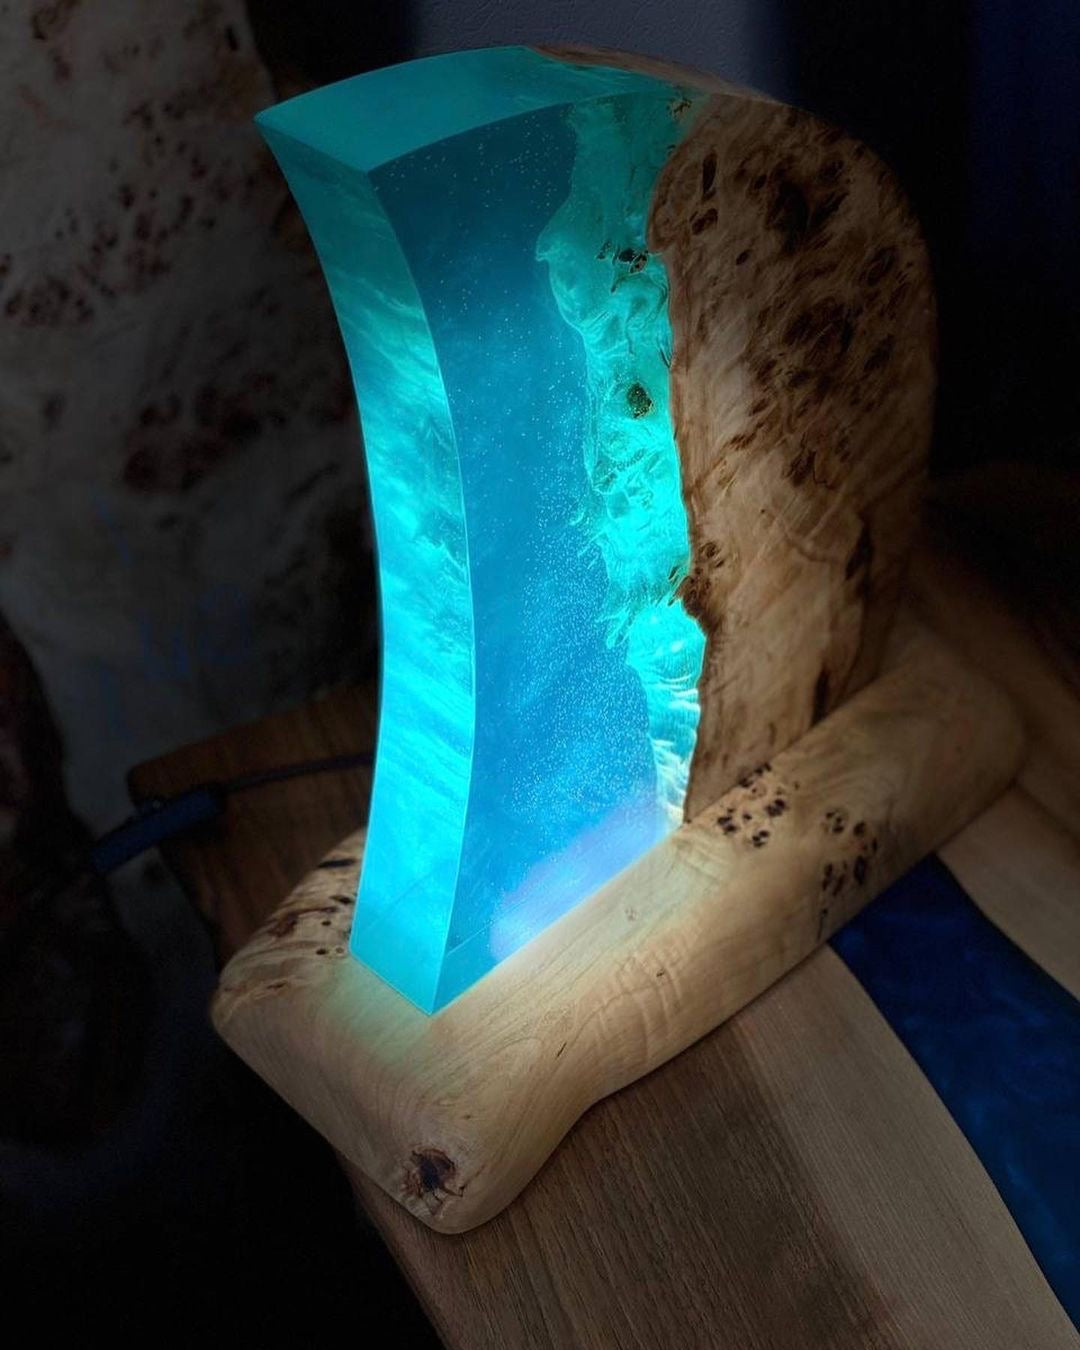 Epoxy Resin Wood Lamp with LED Lights – Step by Step Tutorial — BALTIC DAY